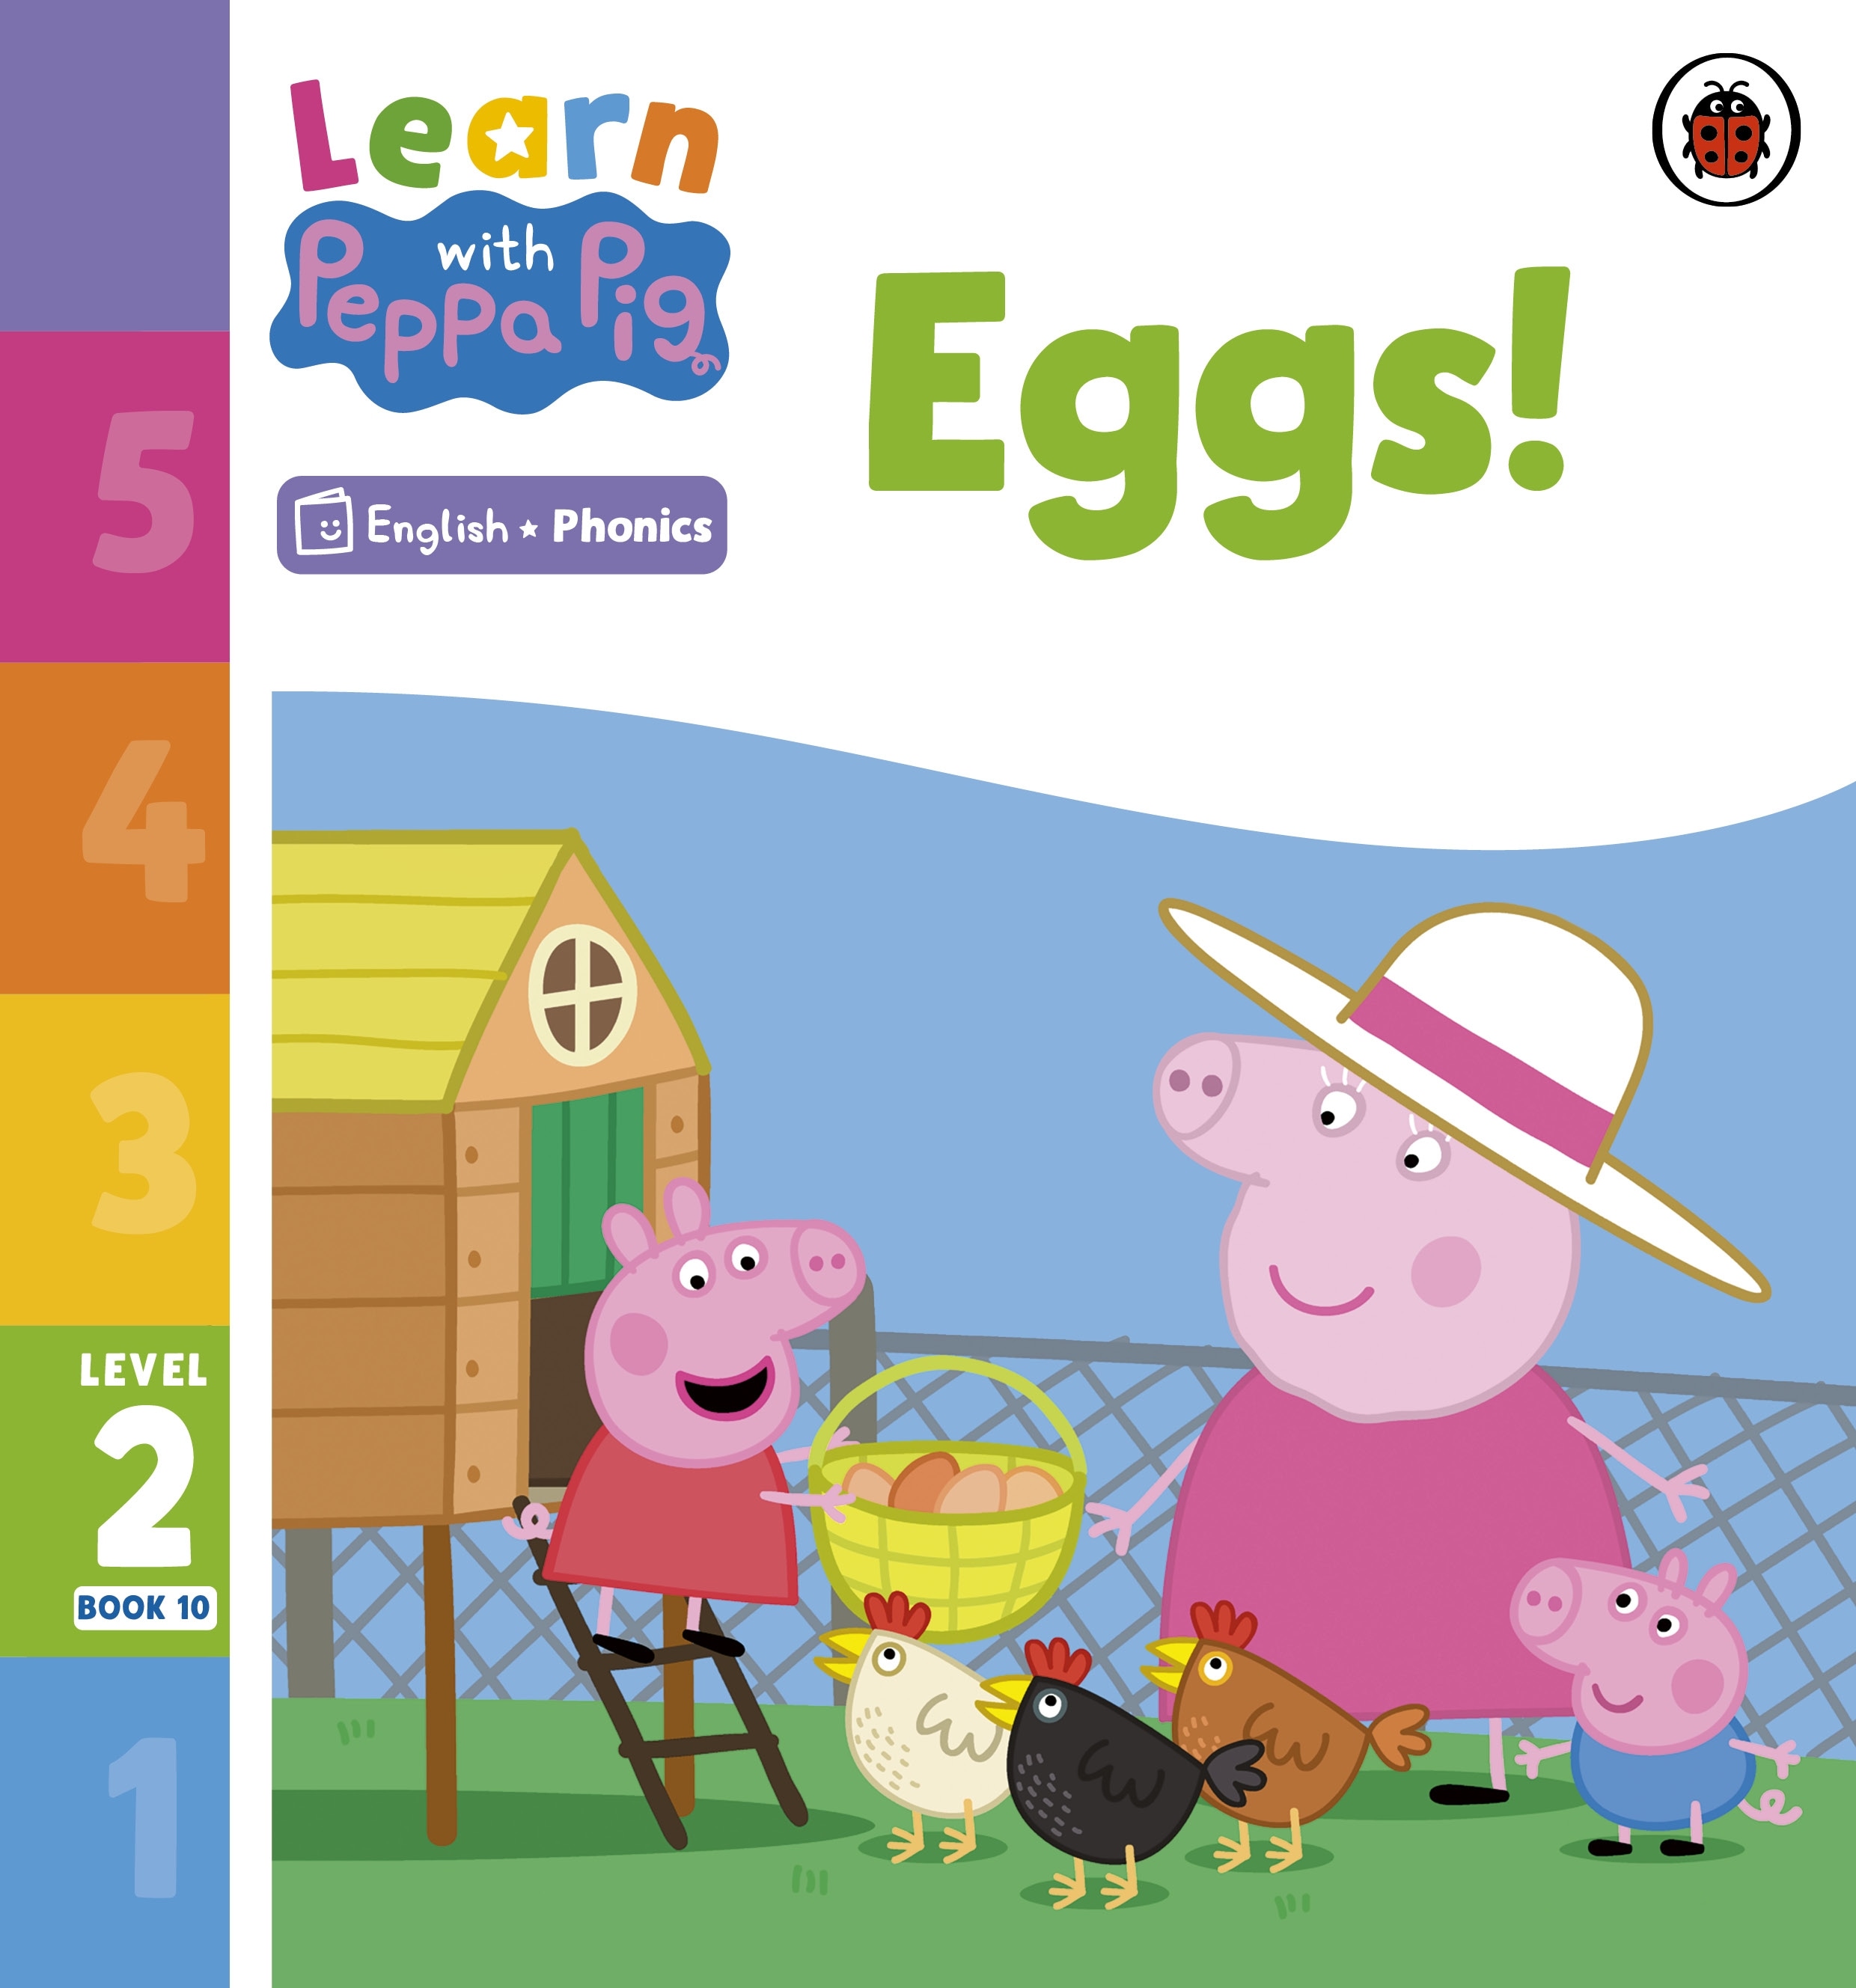 Book “Learn with Peppa Phonics Level 2 Book 10 — Eggs! (Phonics Reader)” by Peppa Pig — January 5, 2023